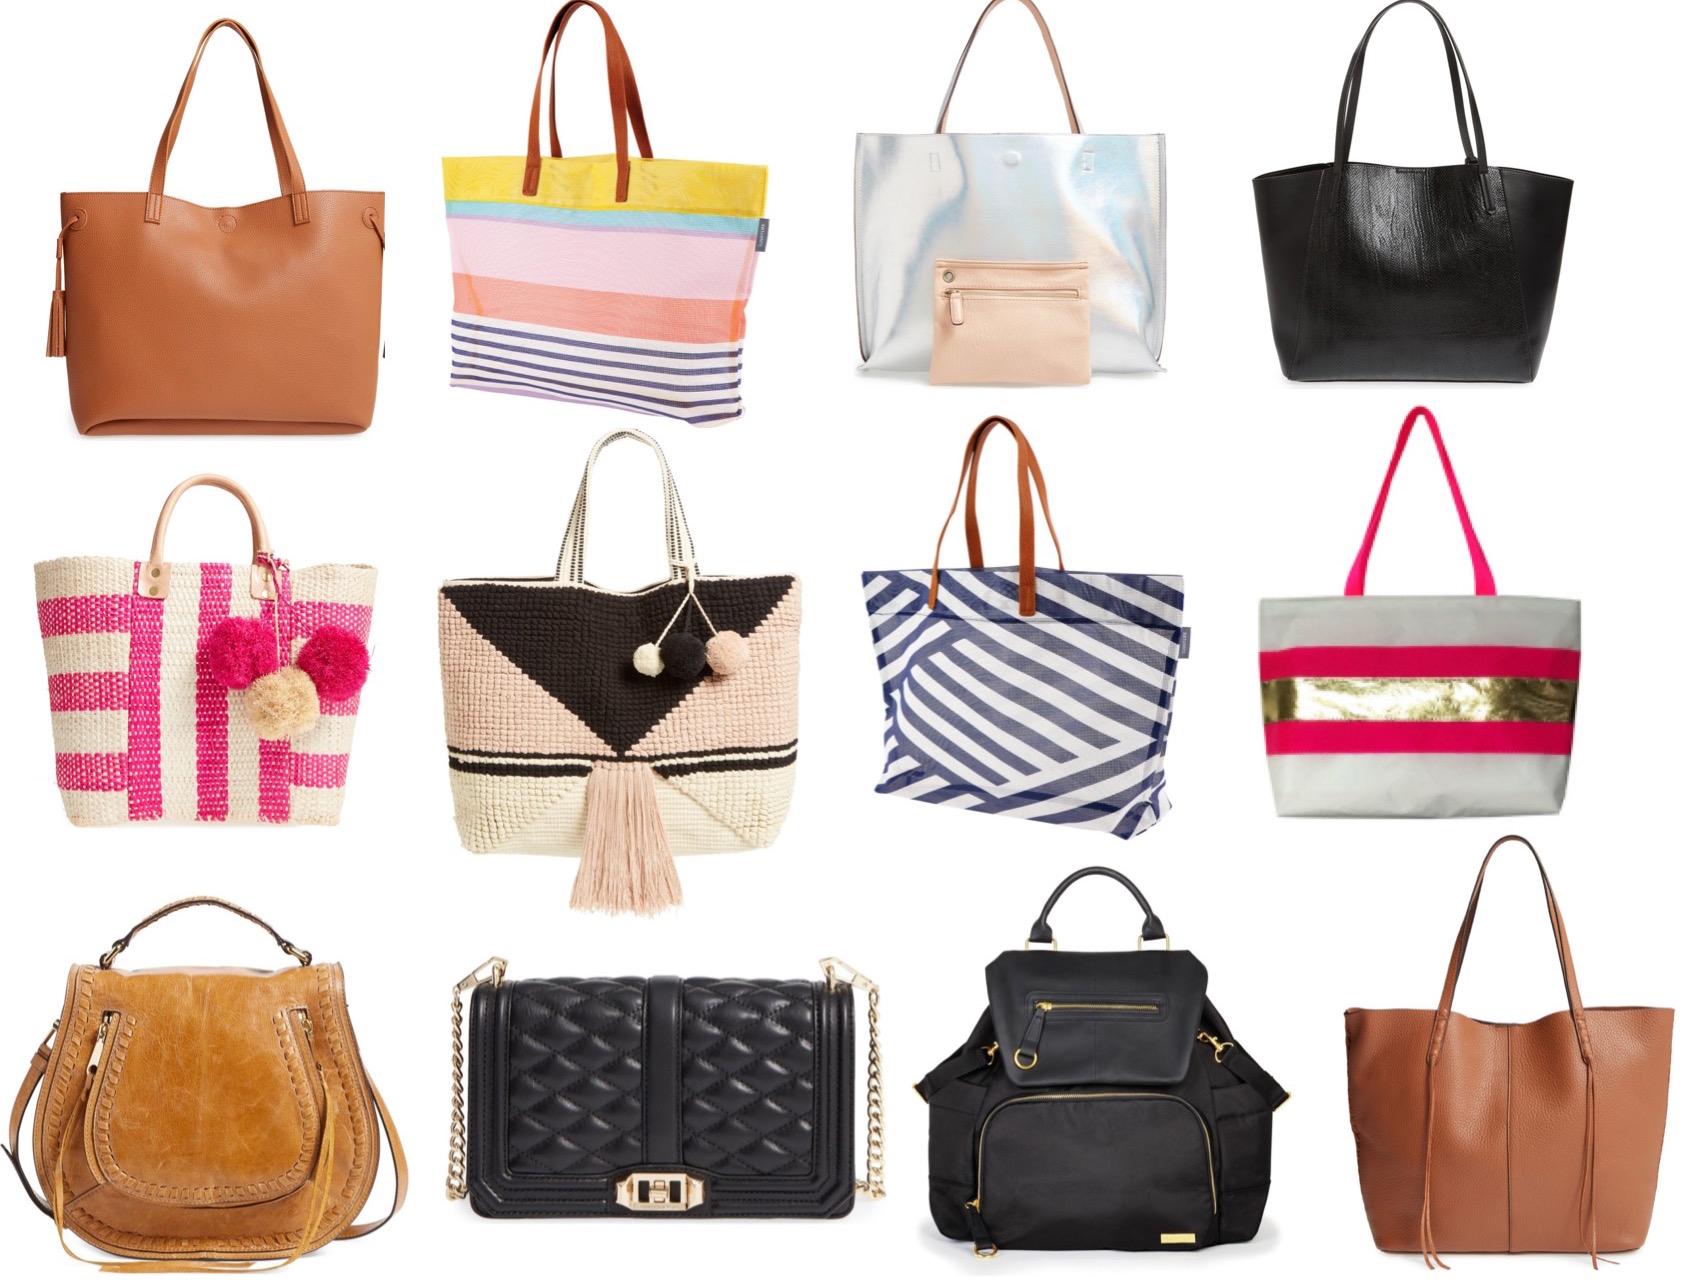 Faux Leather Totes, Beach Bags, Purses and Backpacks